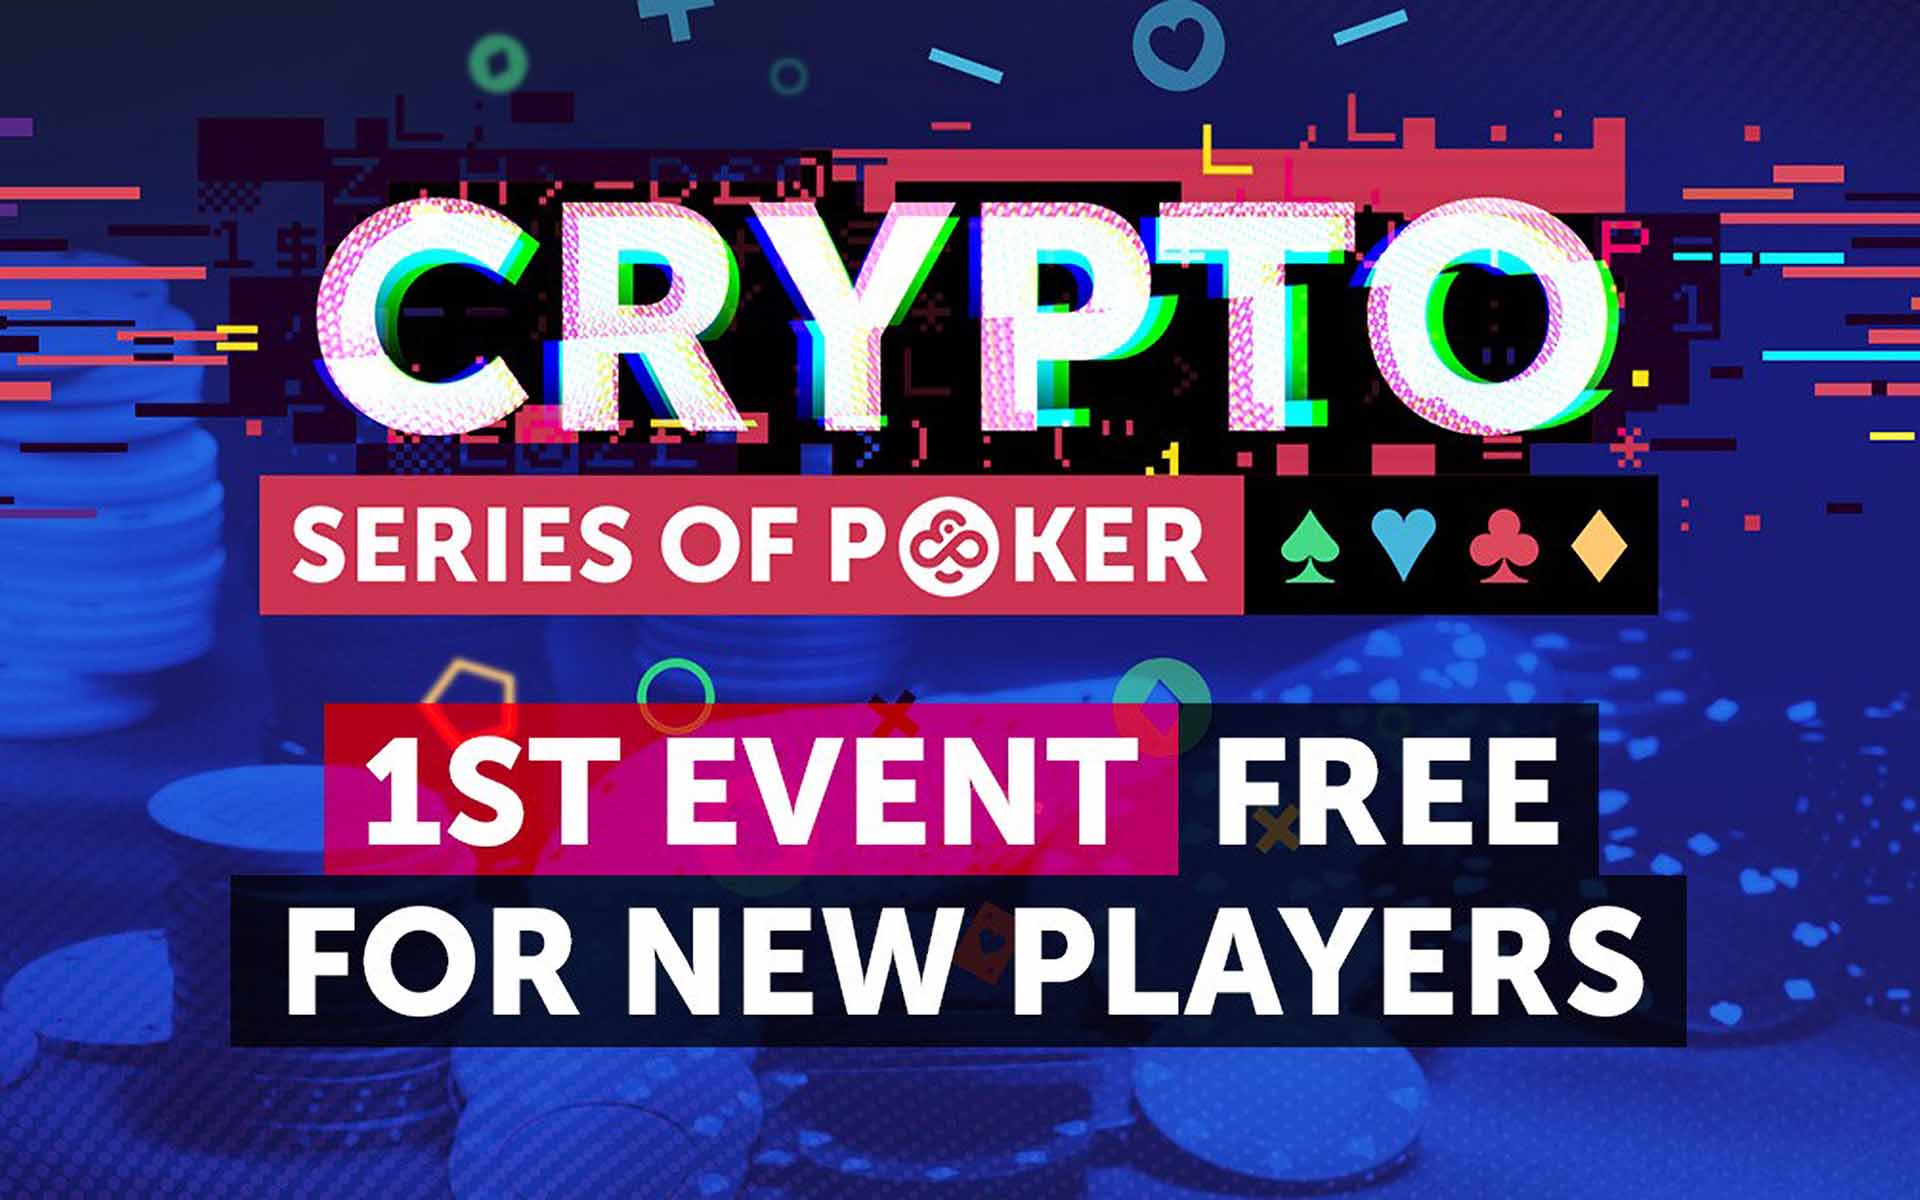 Cryptocurrency Based Online Poker Room CoinPoker Launches the First Crypto Series of Poker (CSOP) with a Prize Pool of 10,000,000 CHP